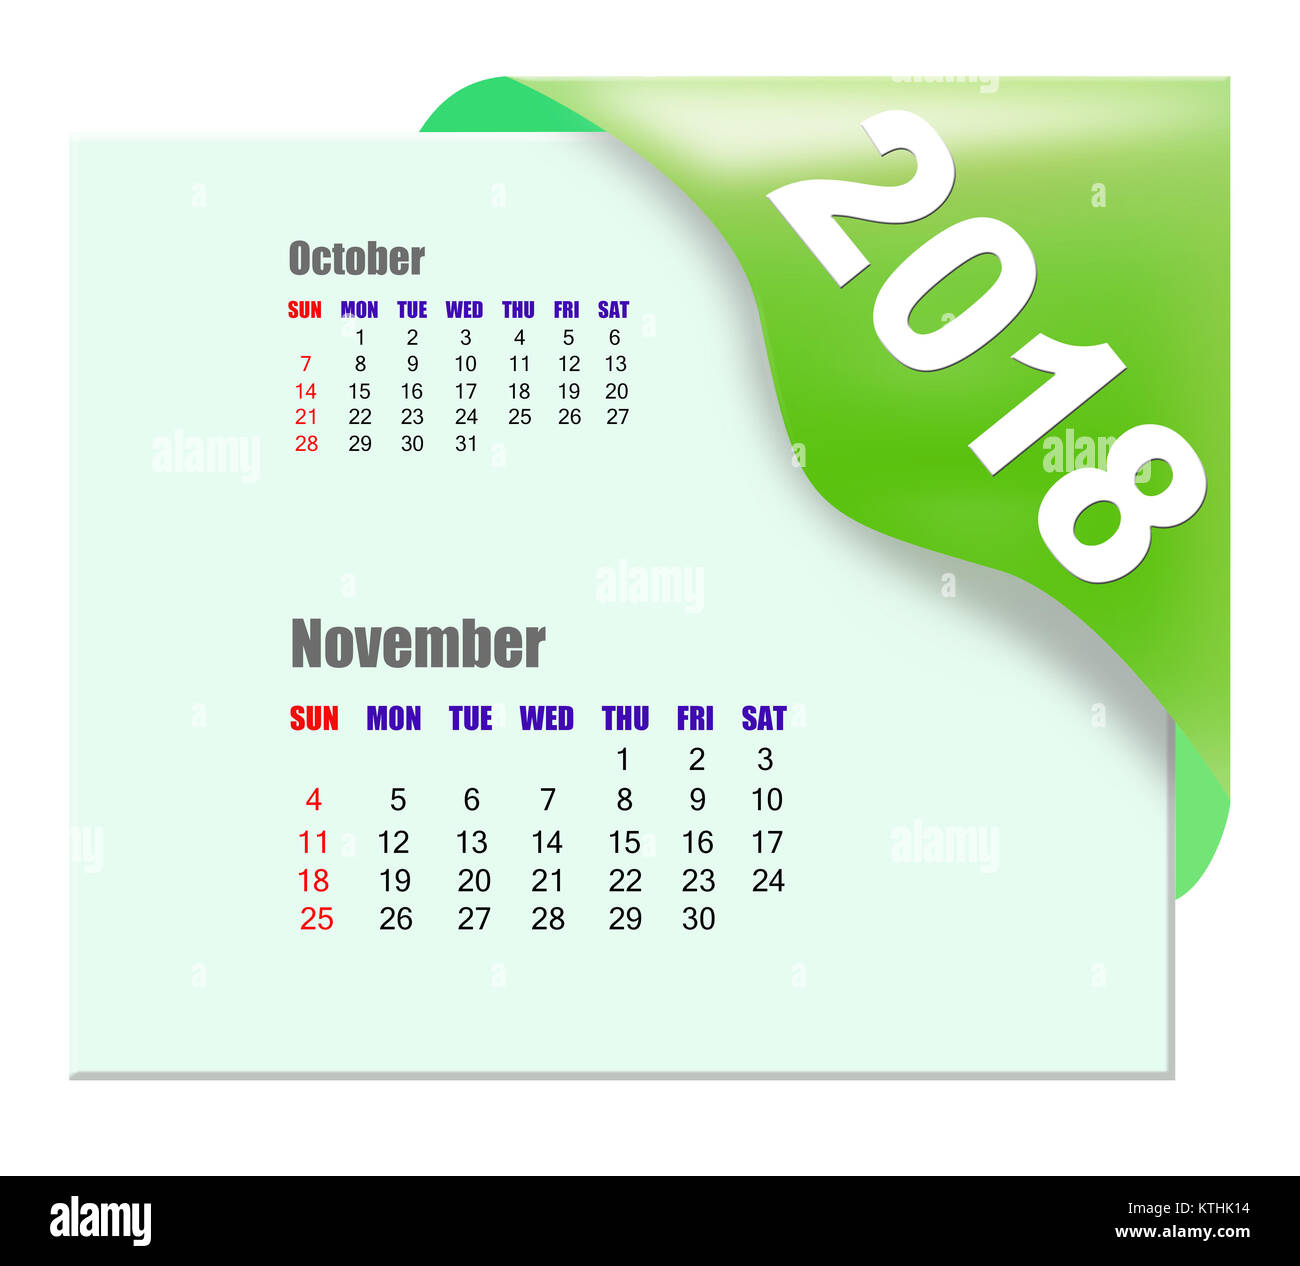 november-2018-calendar-templates-for-word-excel-and-pdf